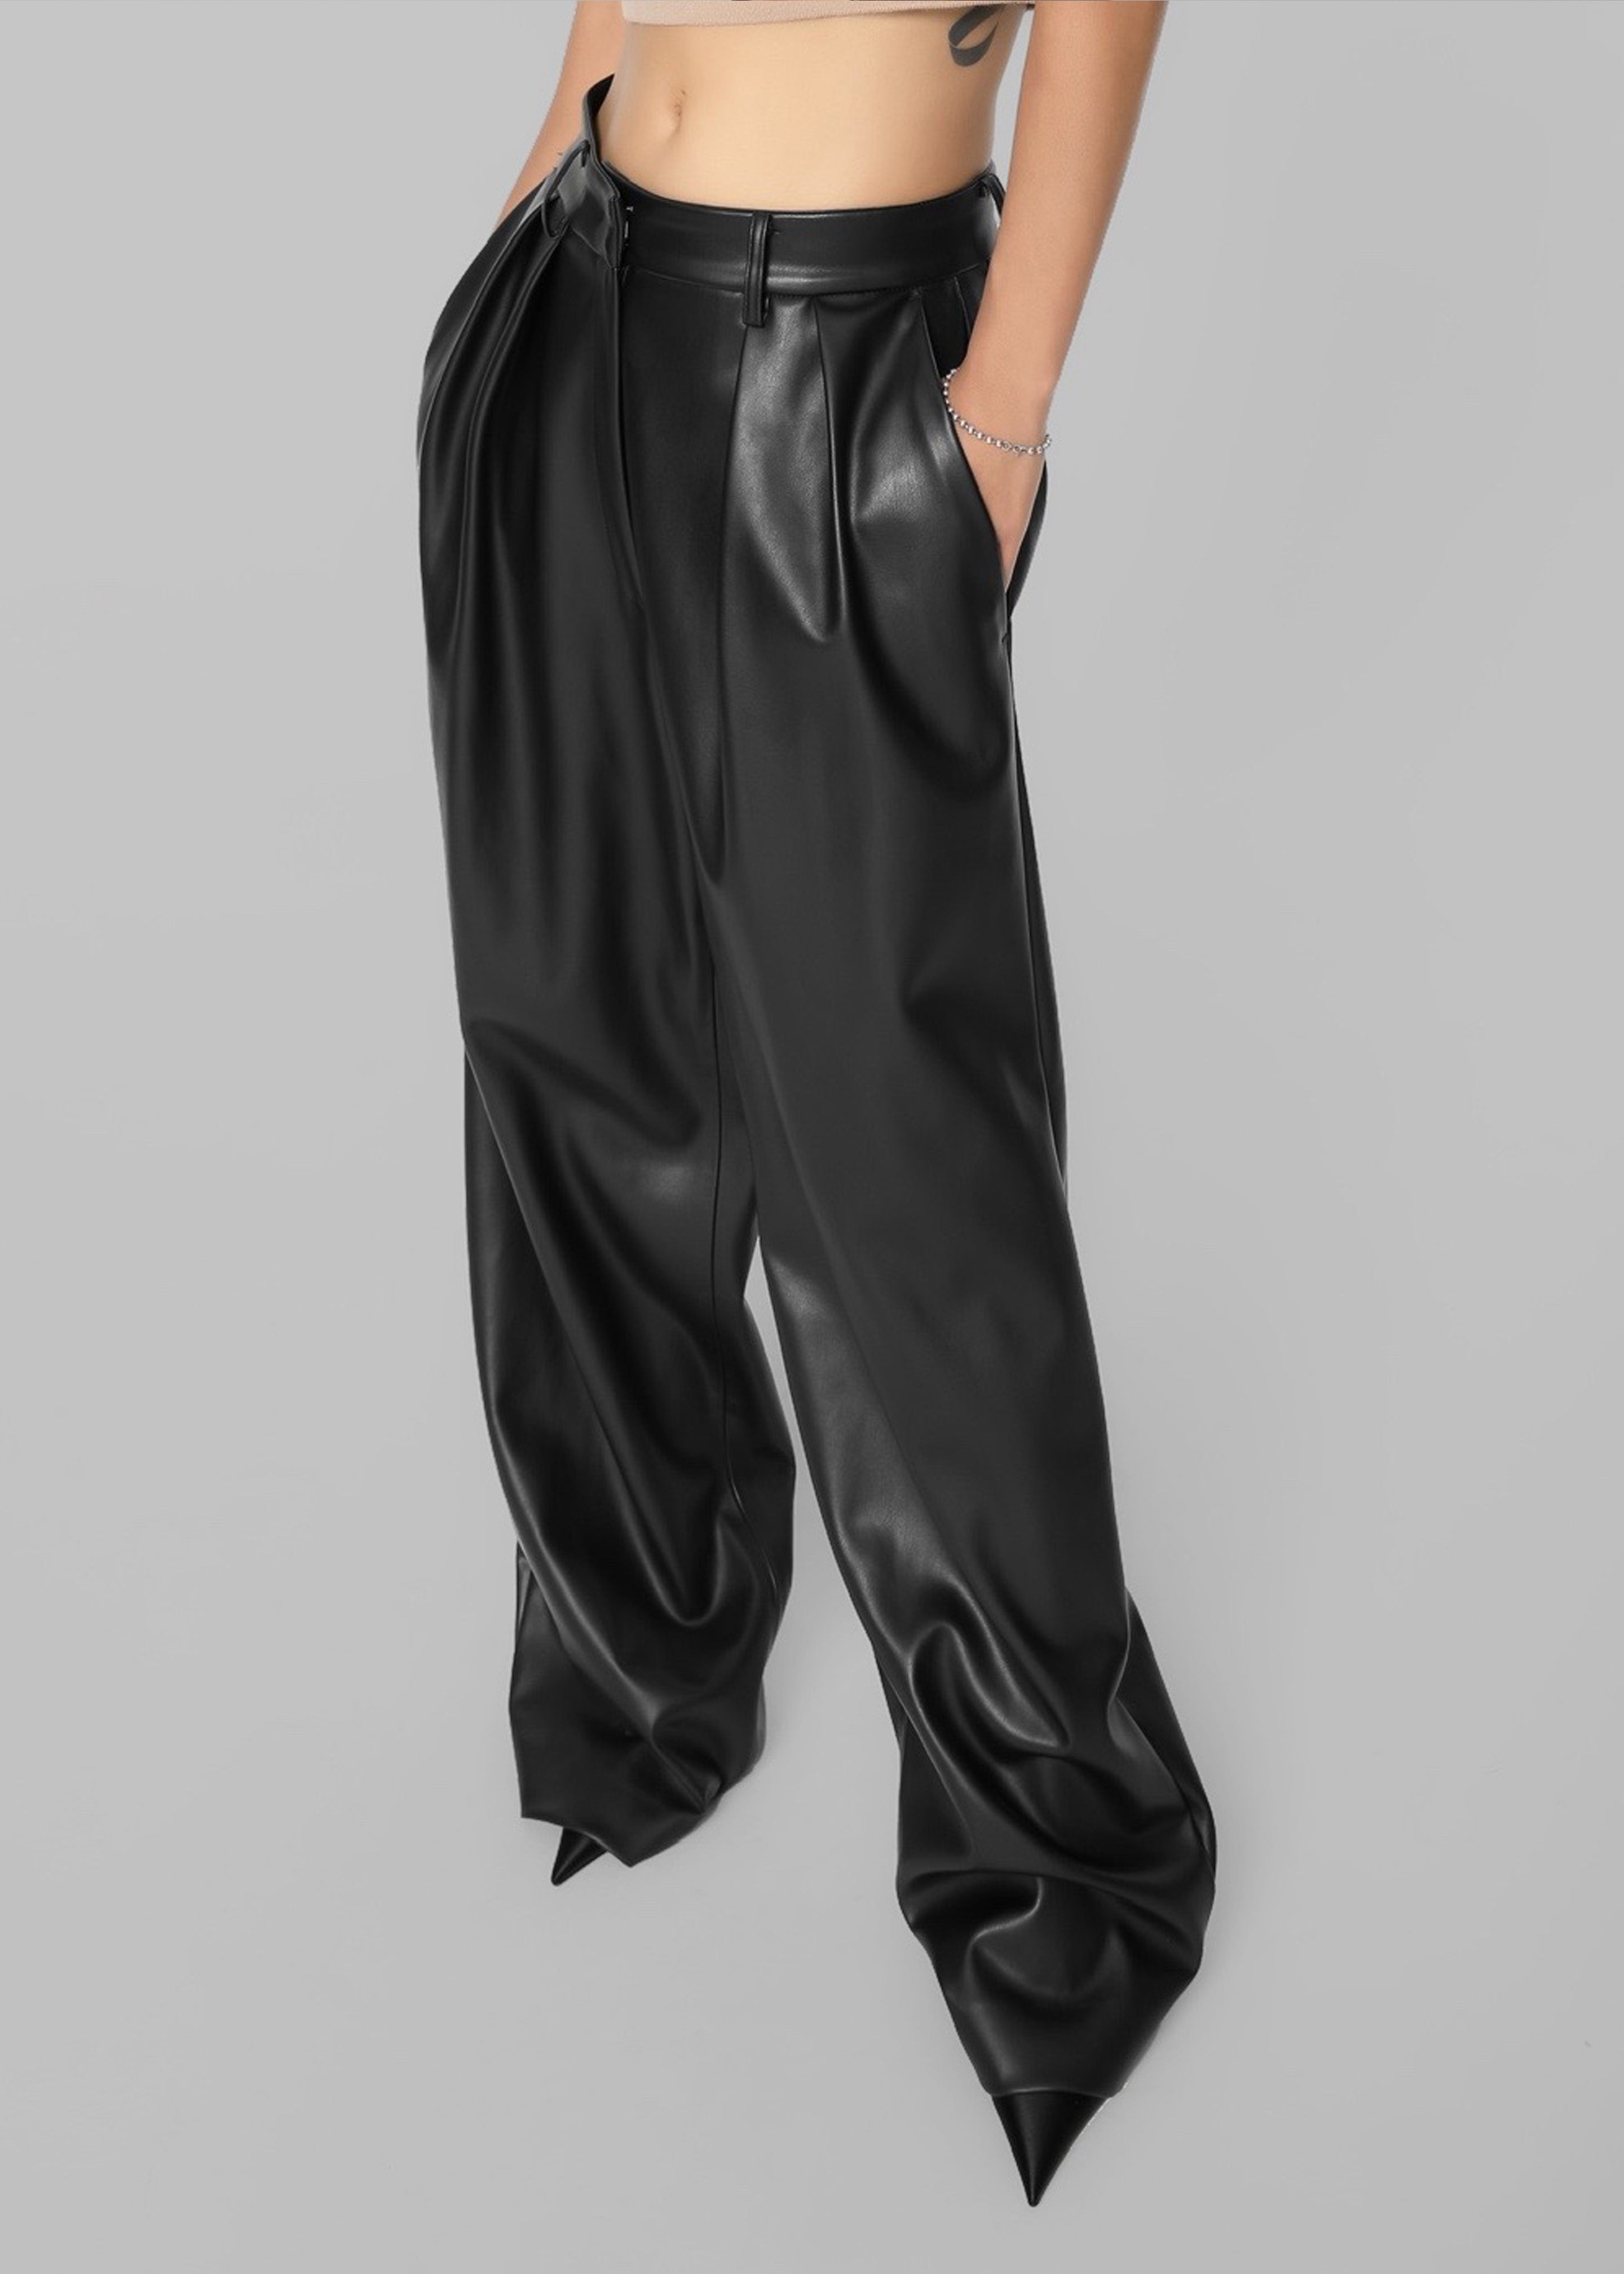 The Persia Faux Leather Pants In Black • Impressions Online Boutique